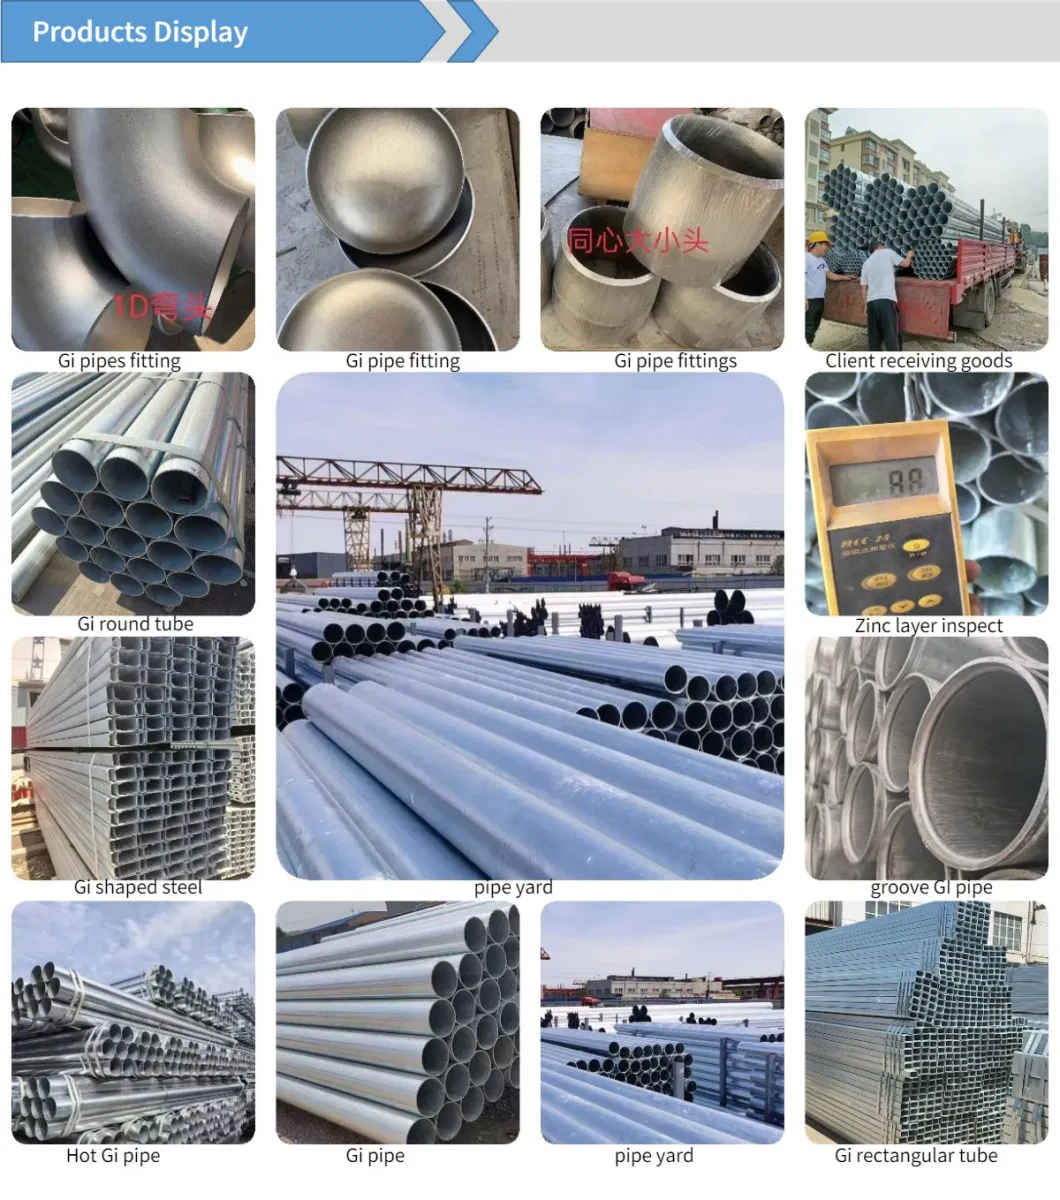 Galvanized Steel Pipe Galvanized Pipe Galvanized Seamless Tube Stainless Steel Pipe/Square/Round/Seamless Steel Pipe/Welded/Galvanized/Titanium